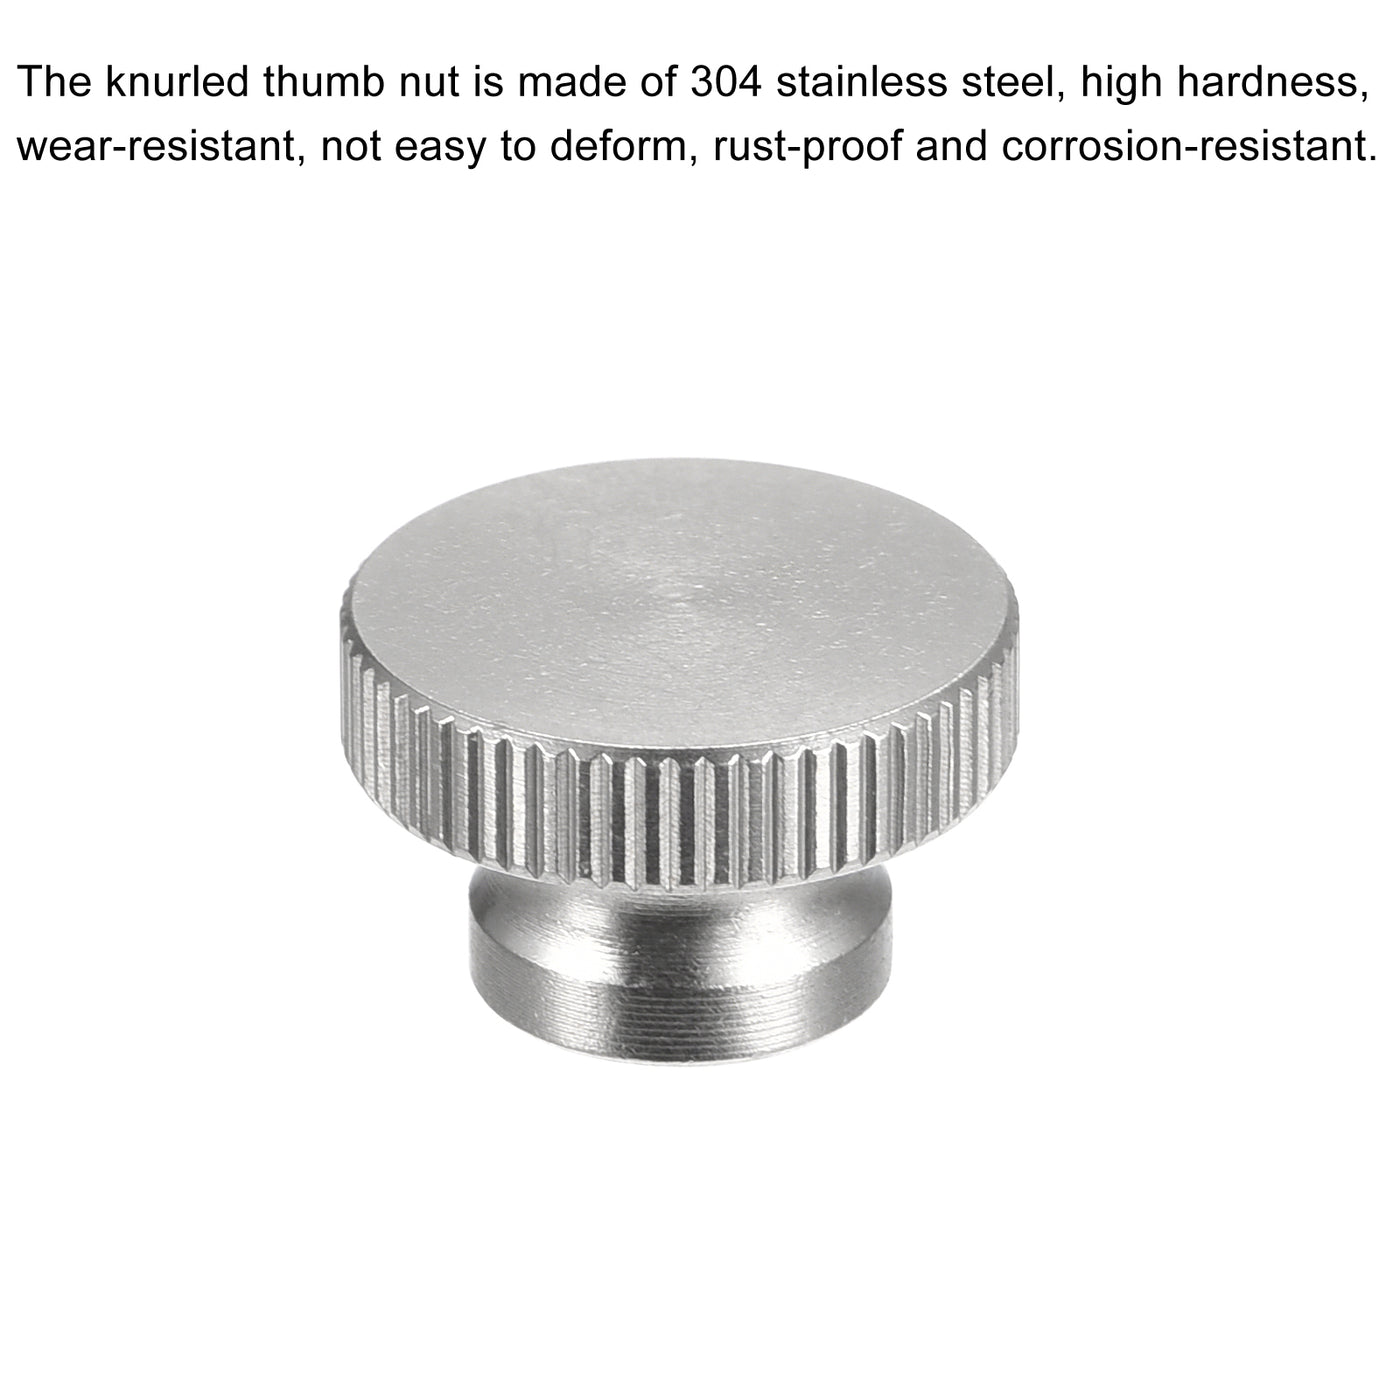 uxcell Uxcell Knurled Thumb Nuts, 2pcs M5 x D16mm x H10mm 304 Stainless Steel Blind Hole Nuts